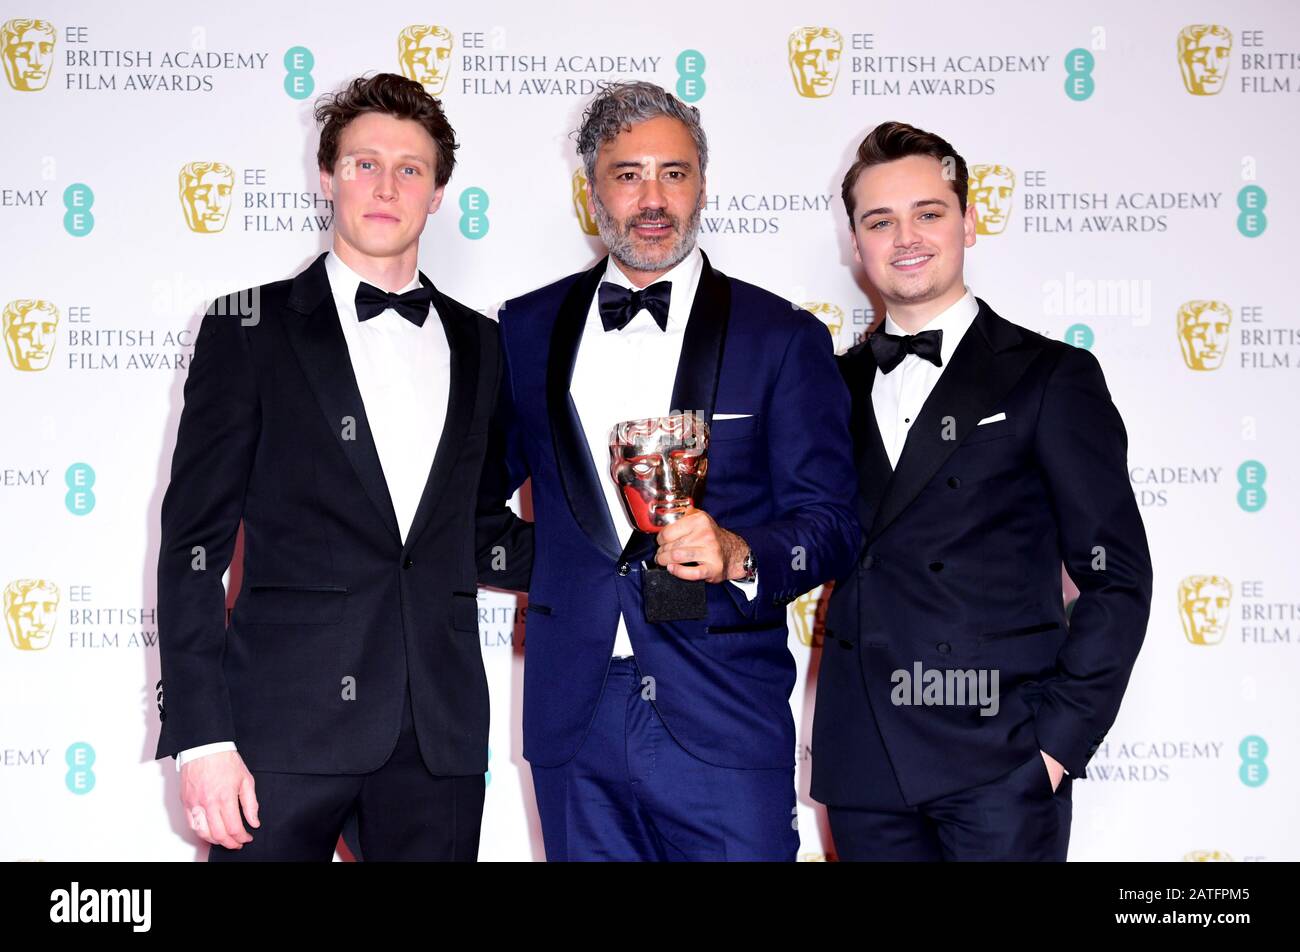 Charles Chapman and George MacKay pose for a phot with Taika Waititi after presenting him with the award for Best Adapted Screenplay in the press room at the 73rd British Academy Film Awards held at the Royal Albert Hall, London. Stock Photo